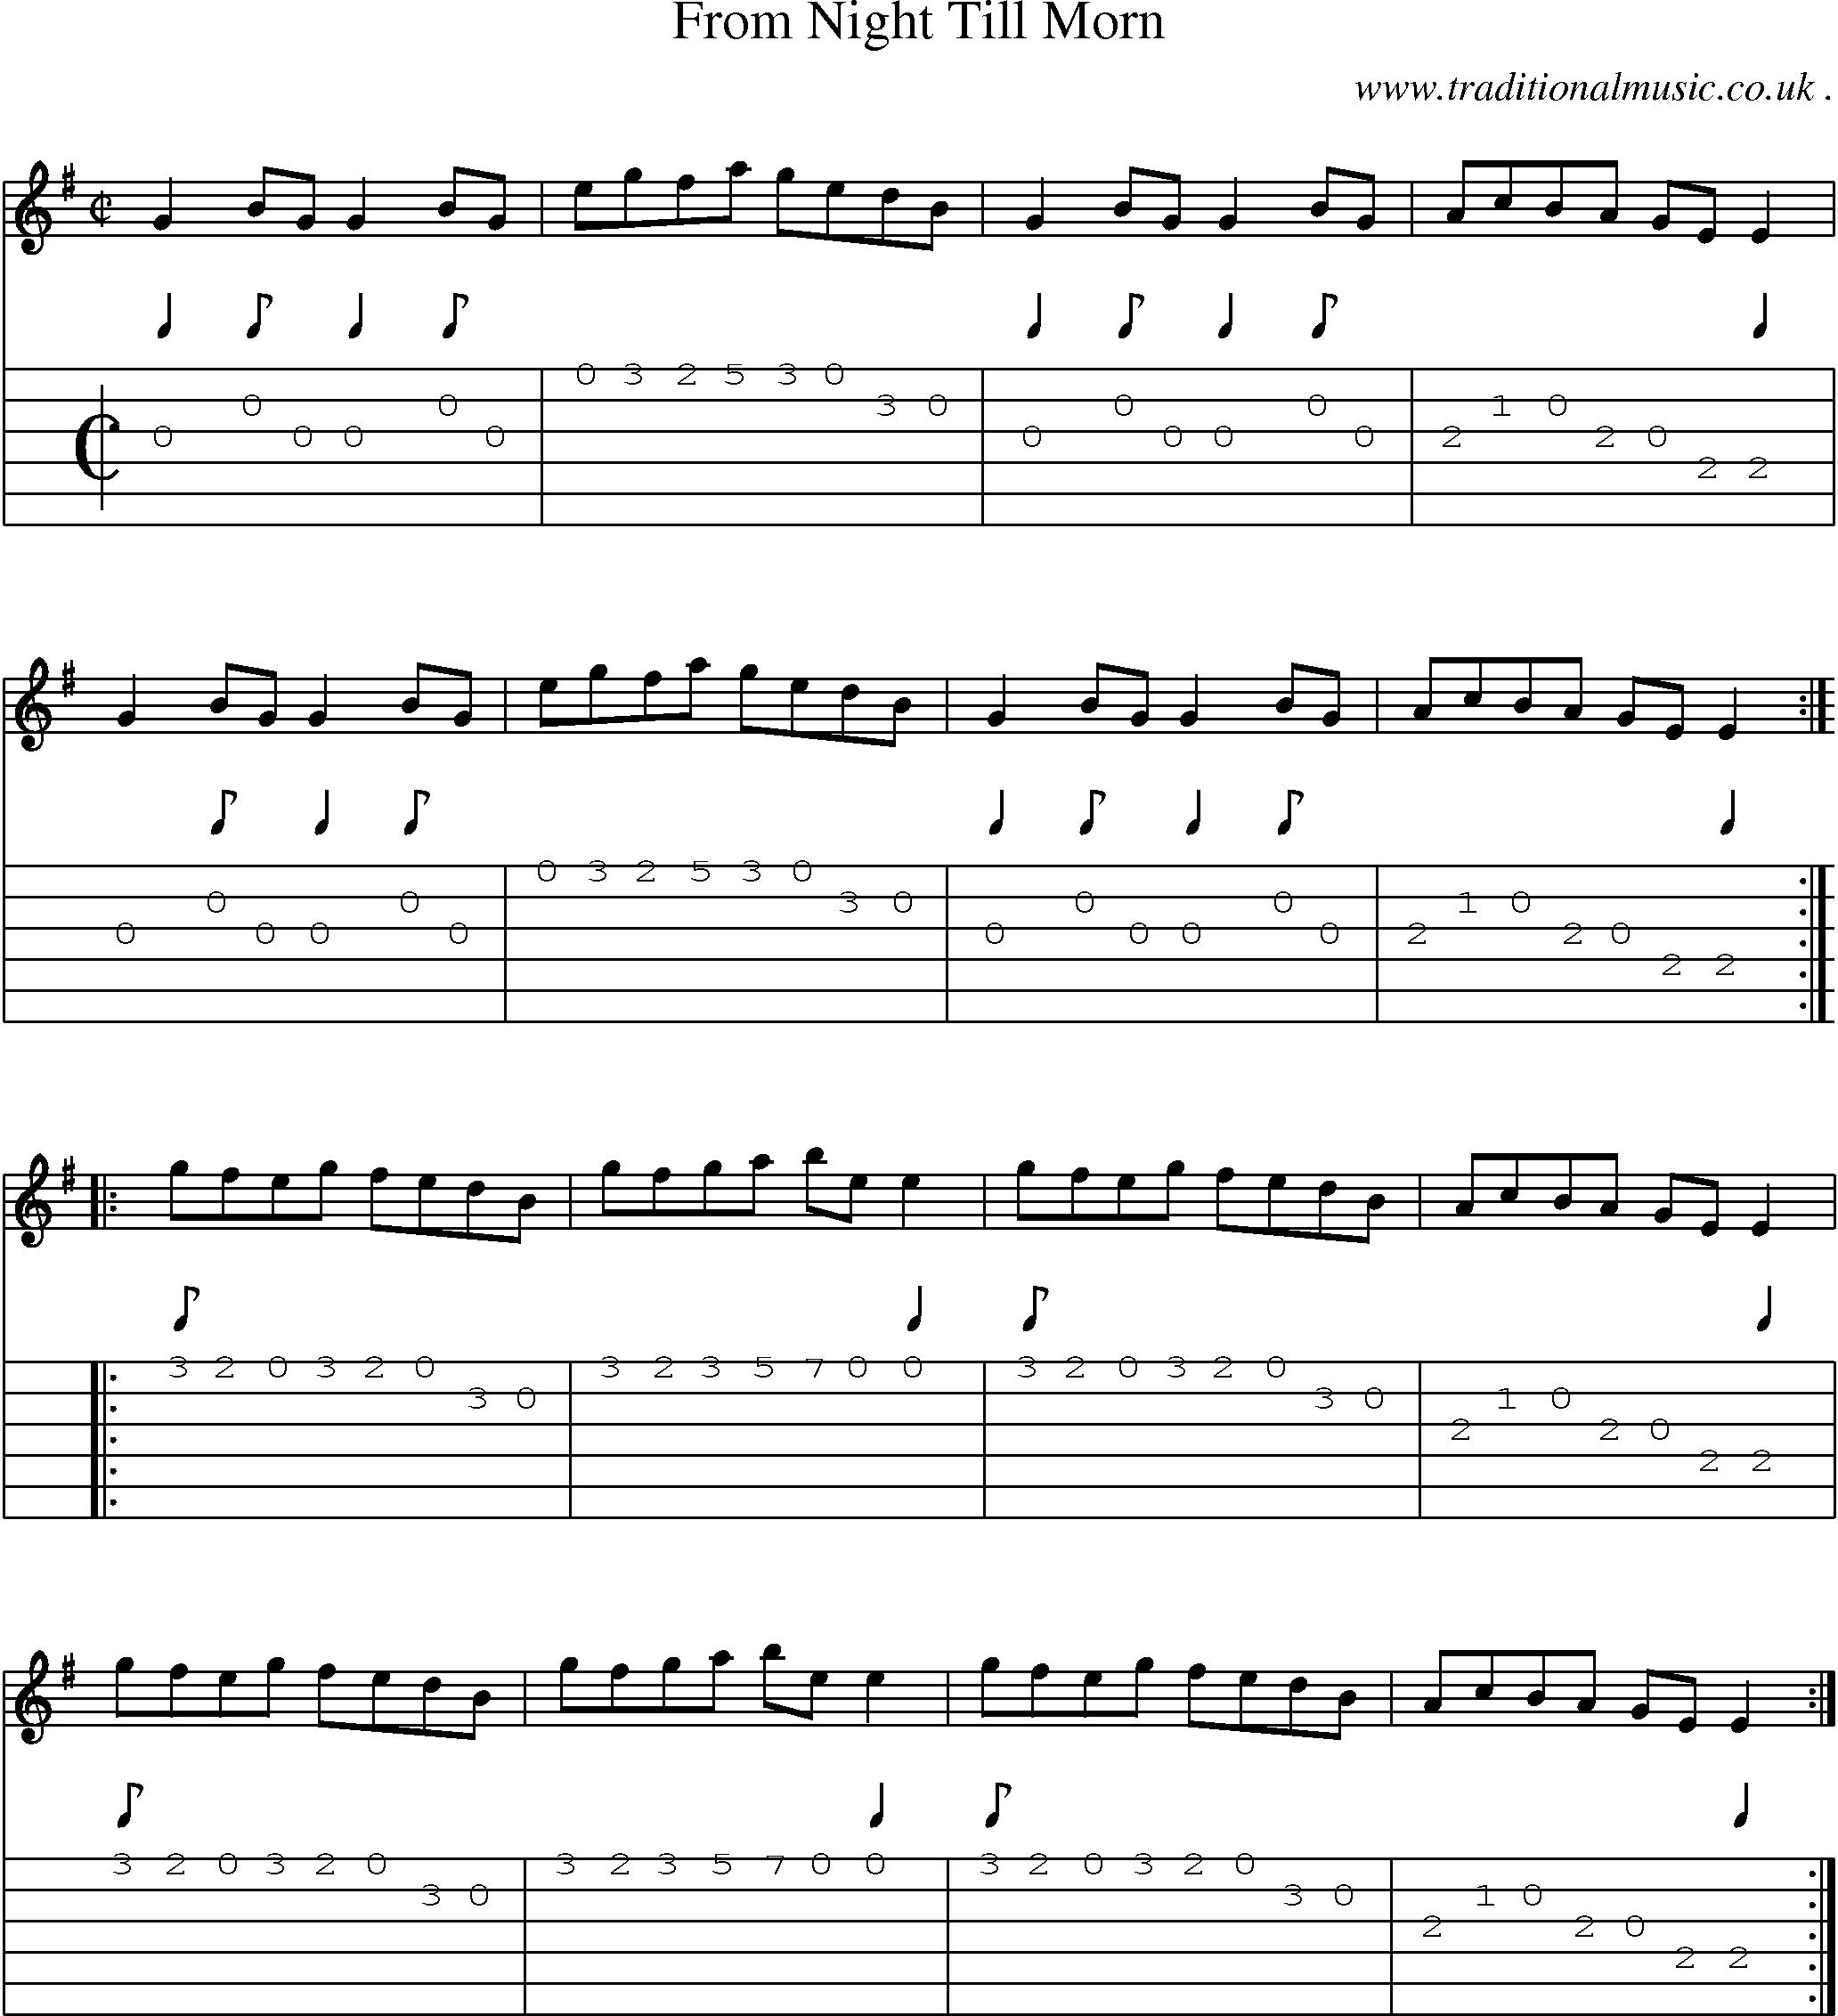 Sheet-Music and Guitar Tabs for From Night Till Morn